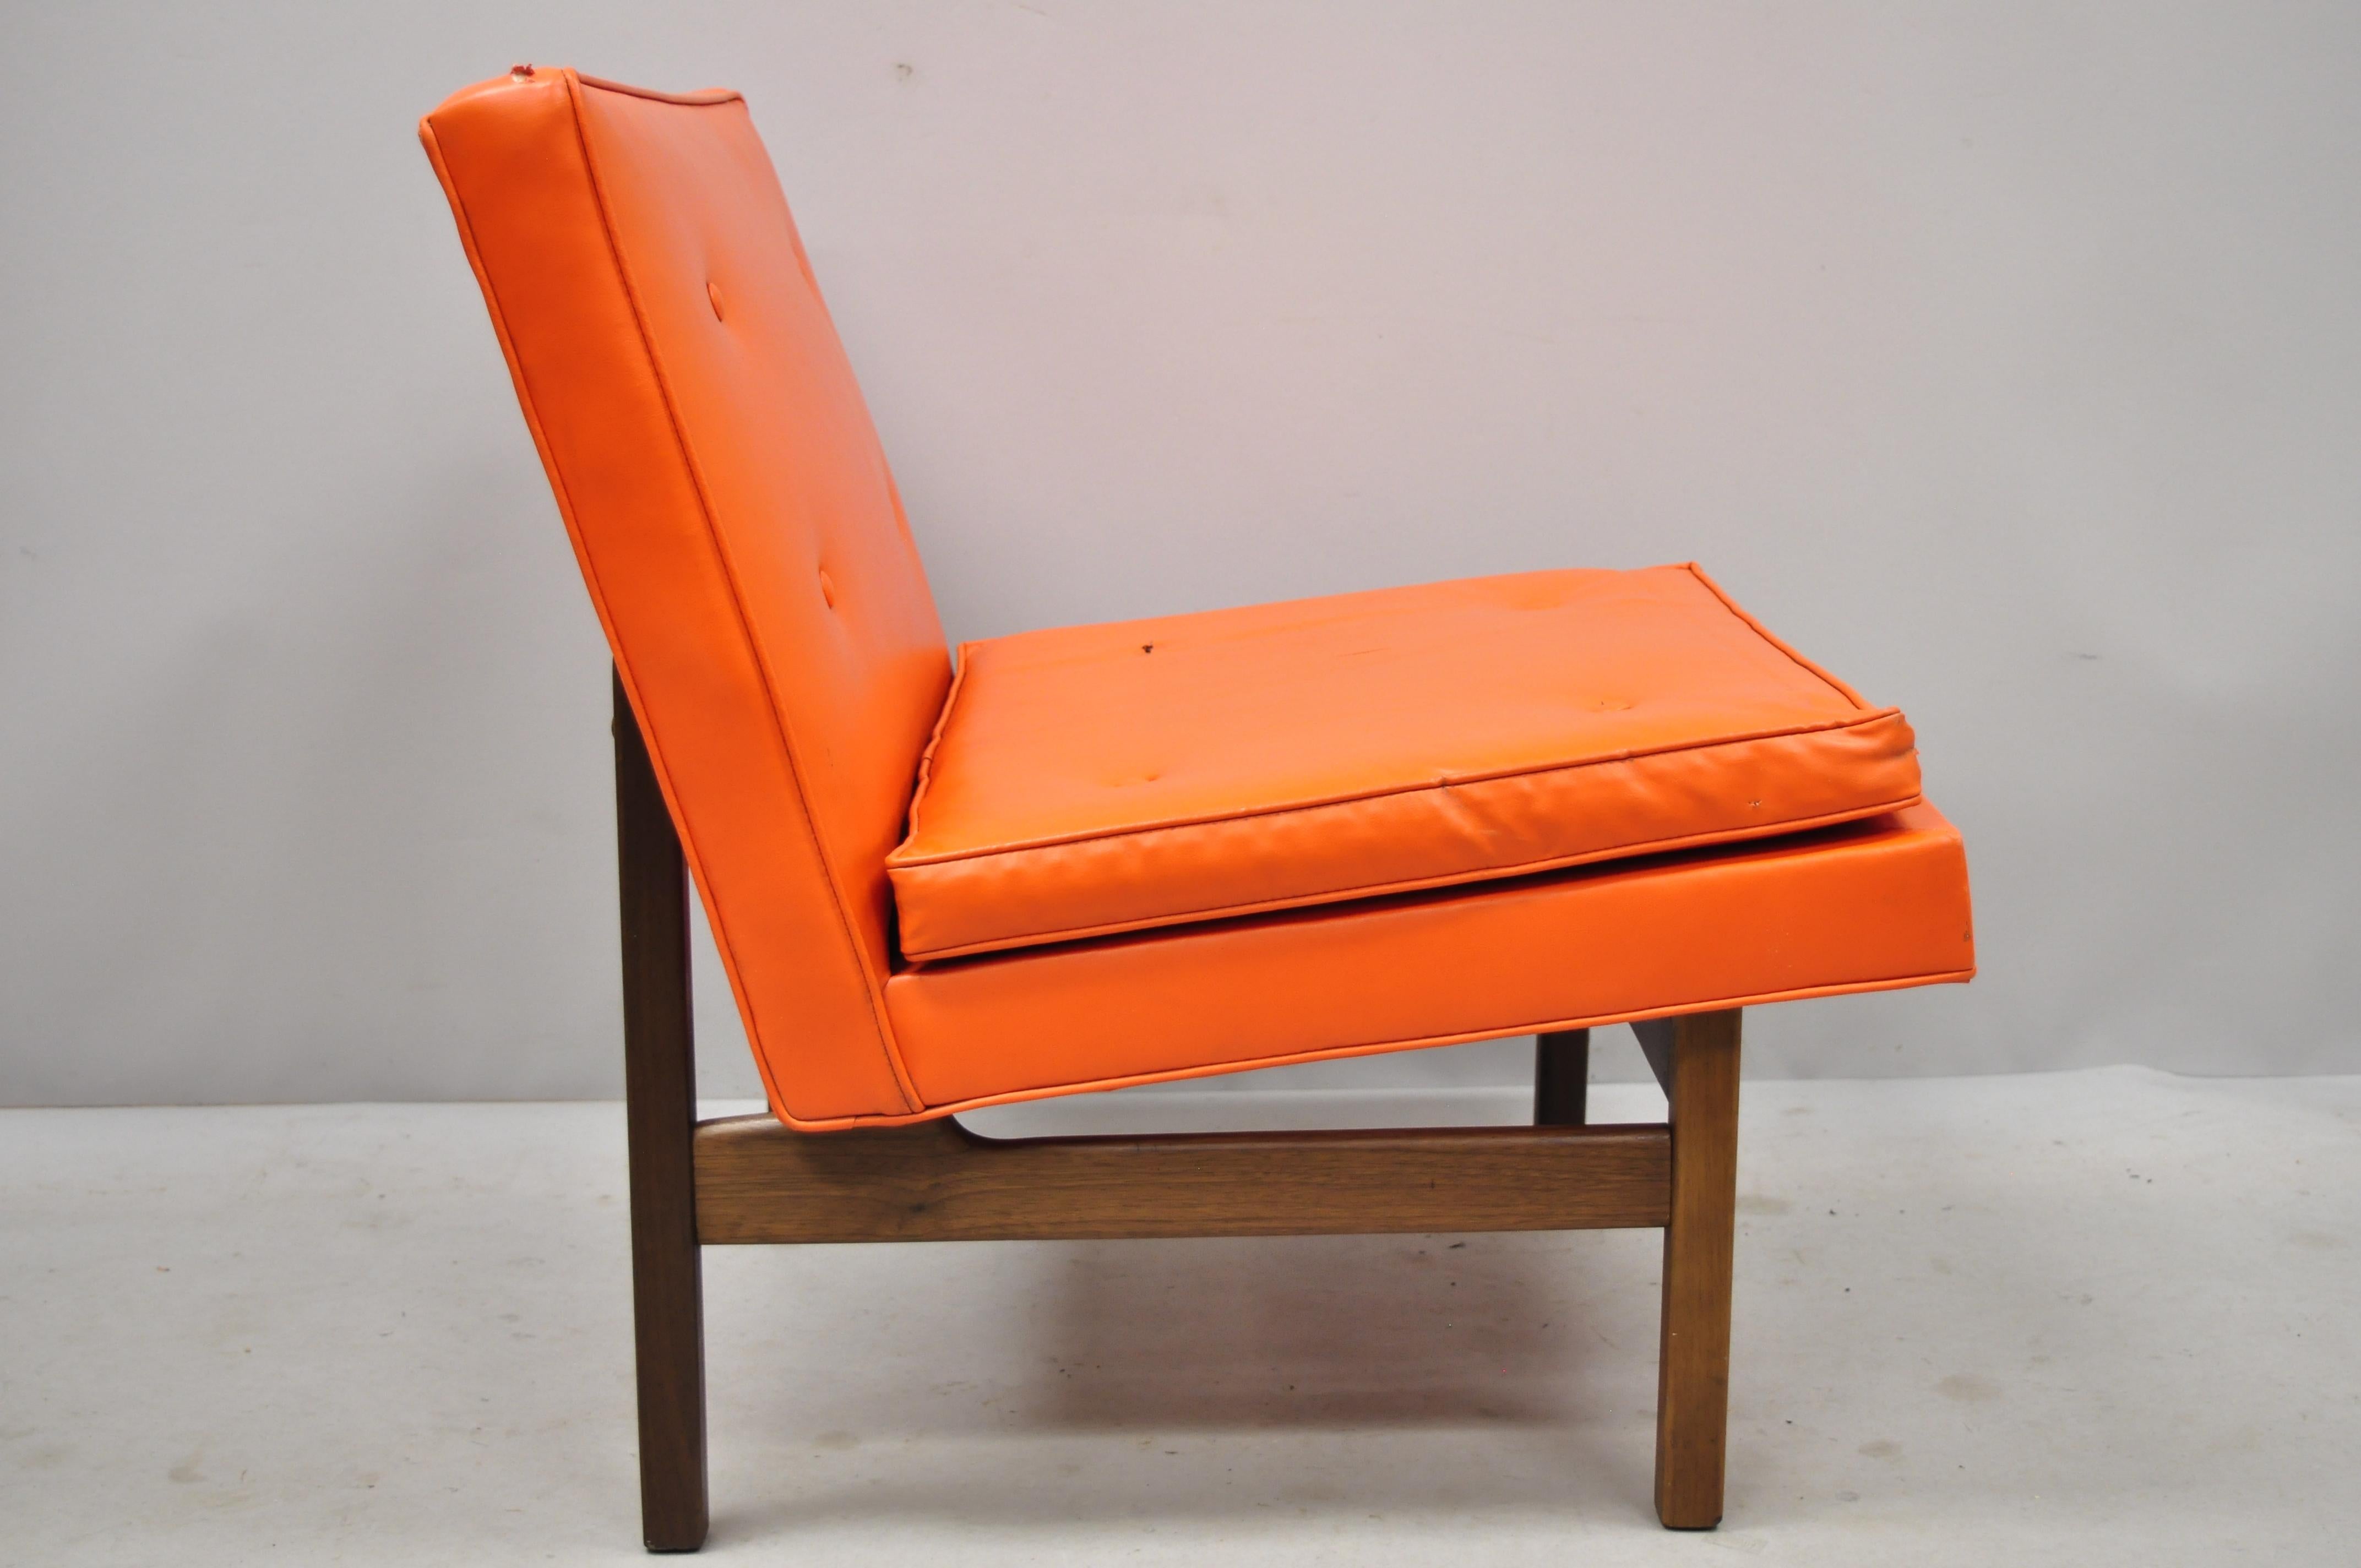 Orange Milo Baughman for Thayer Coggin teak and vinyl slipper lounge chair. Item includes solid wood frame, beautiful wood grain, original label, clean modernist lines, great style and form, circa Mid-20th century. Measurements: 28.5